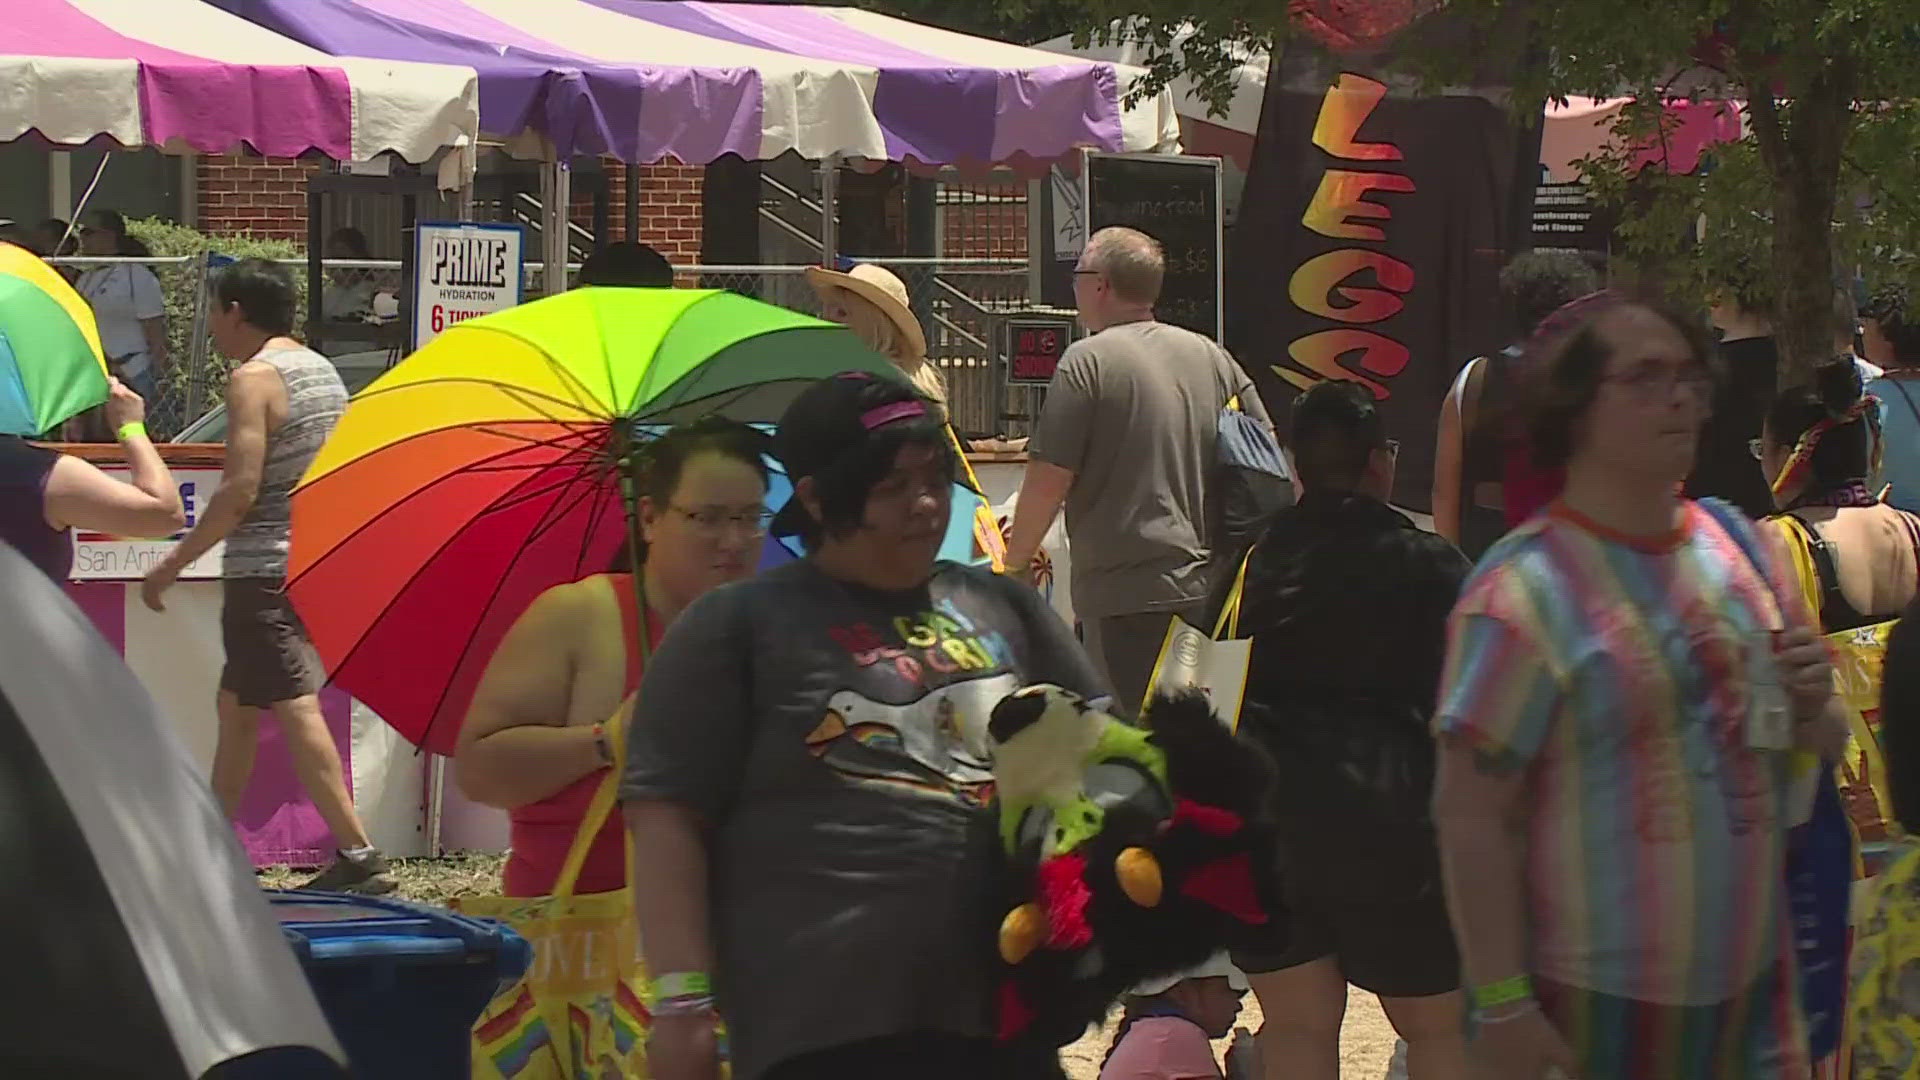 Despite the heat, many people are spending the day downtown for city's official pride celebration